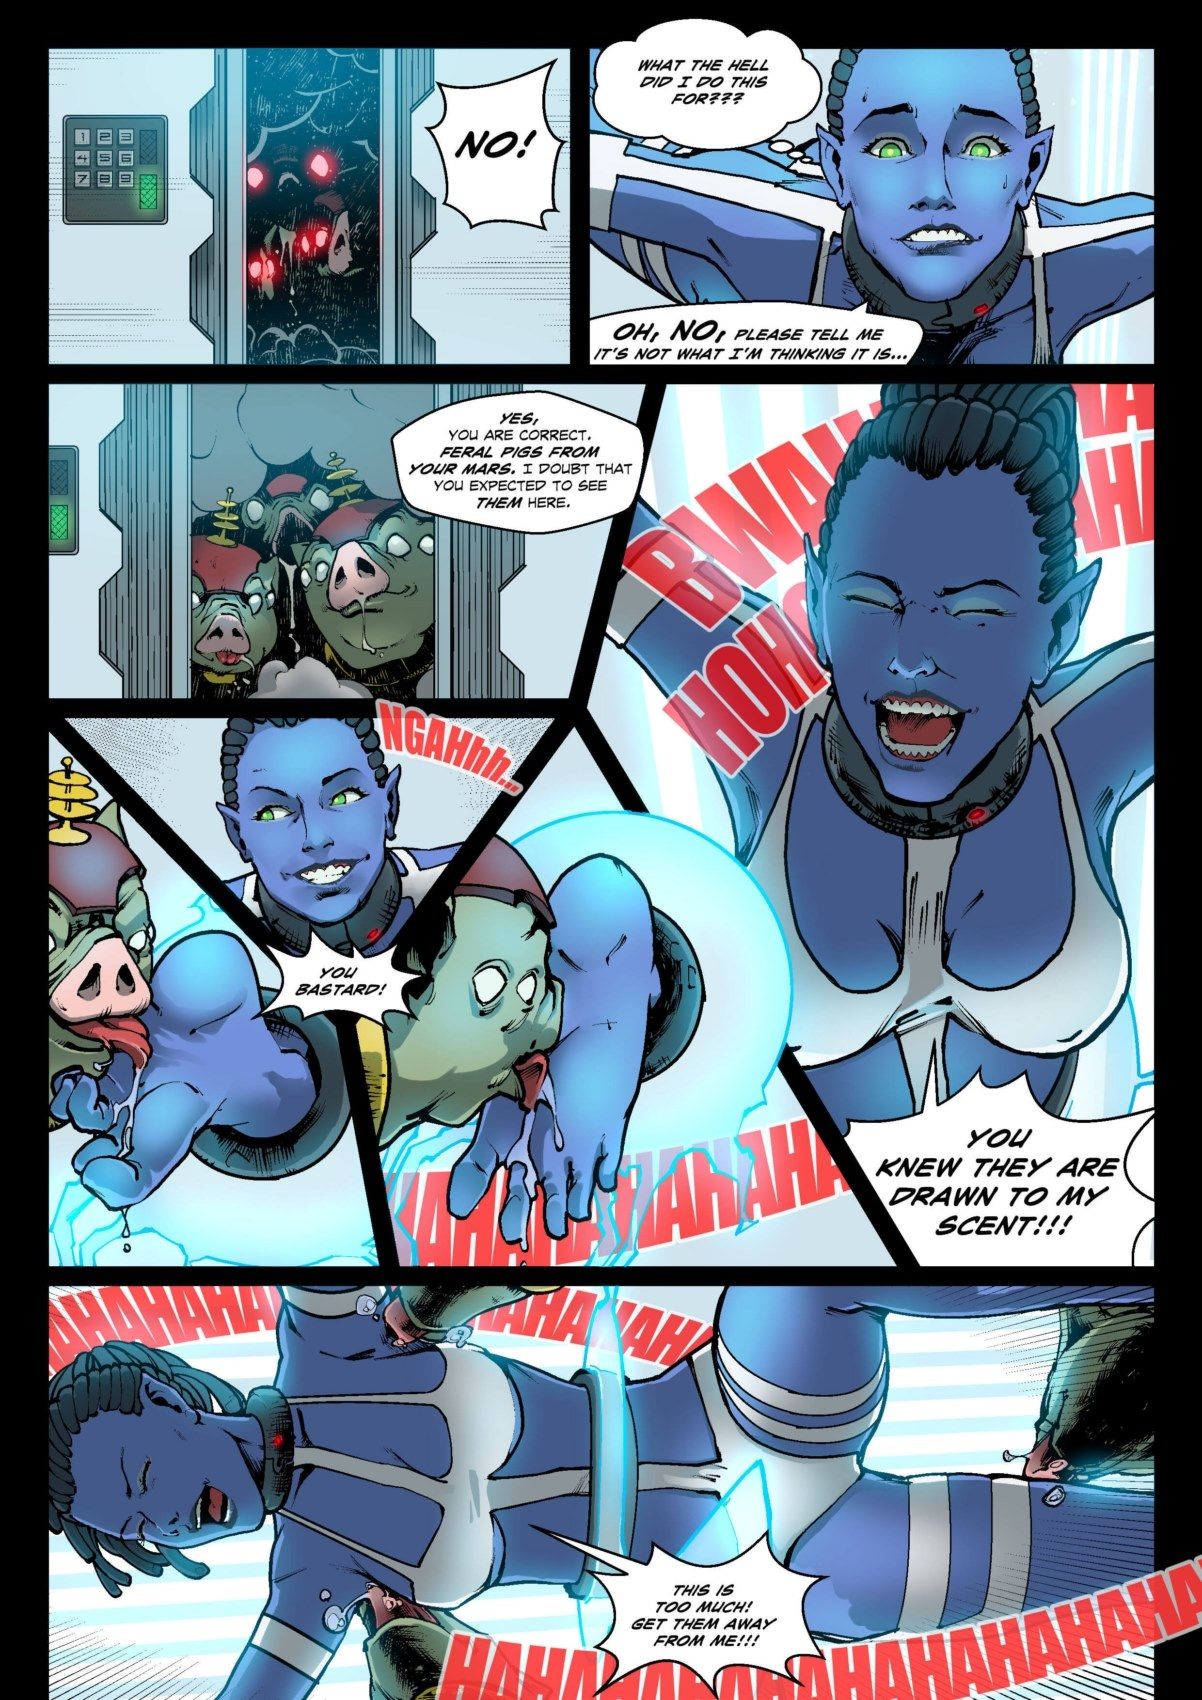 Adventures of the Brave Rangers Issue 02 (PawFeather) page 3